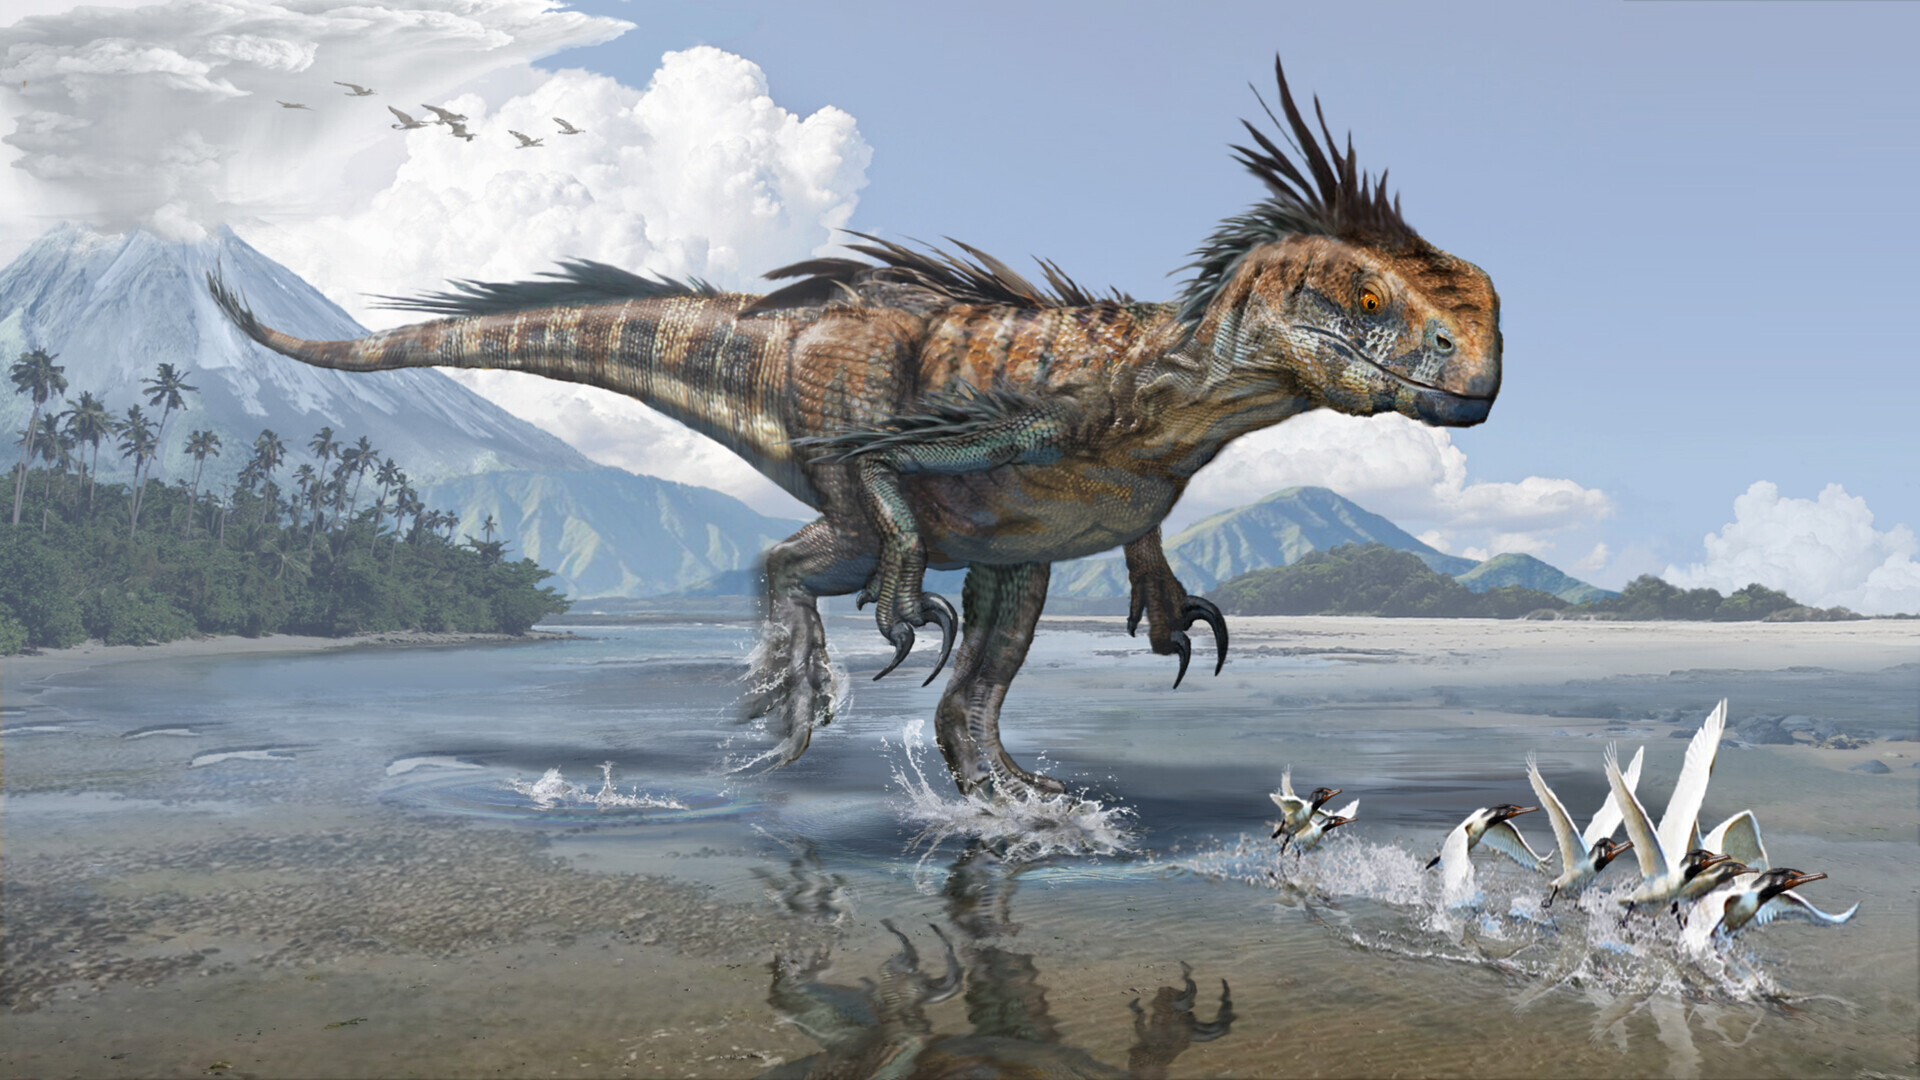 The remains of the largest Megaraptor flag have been found